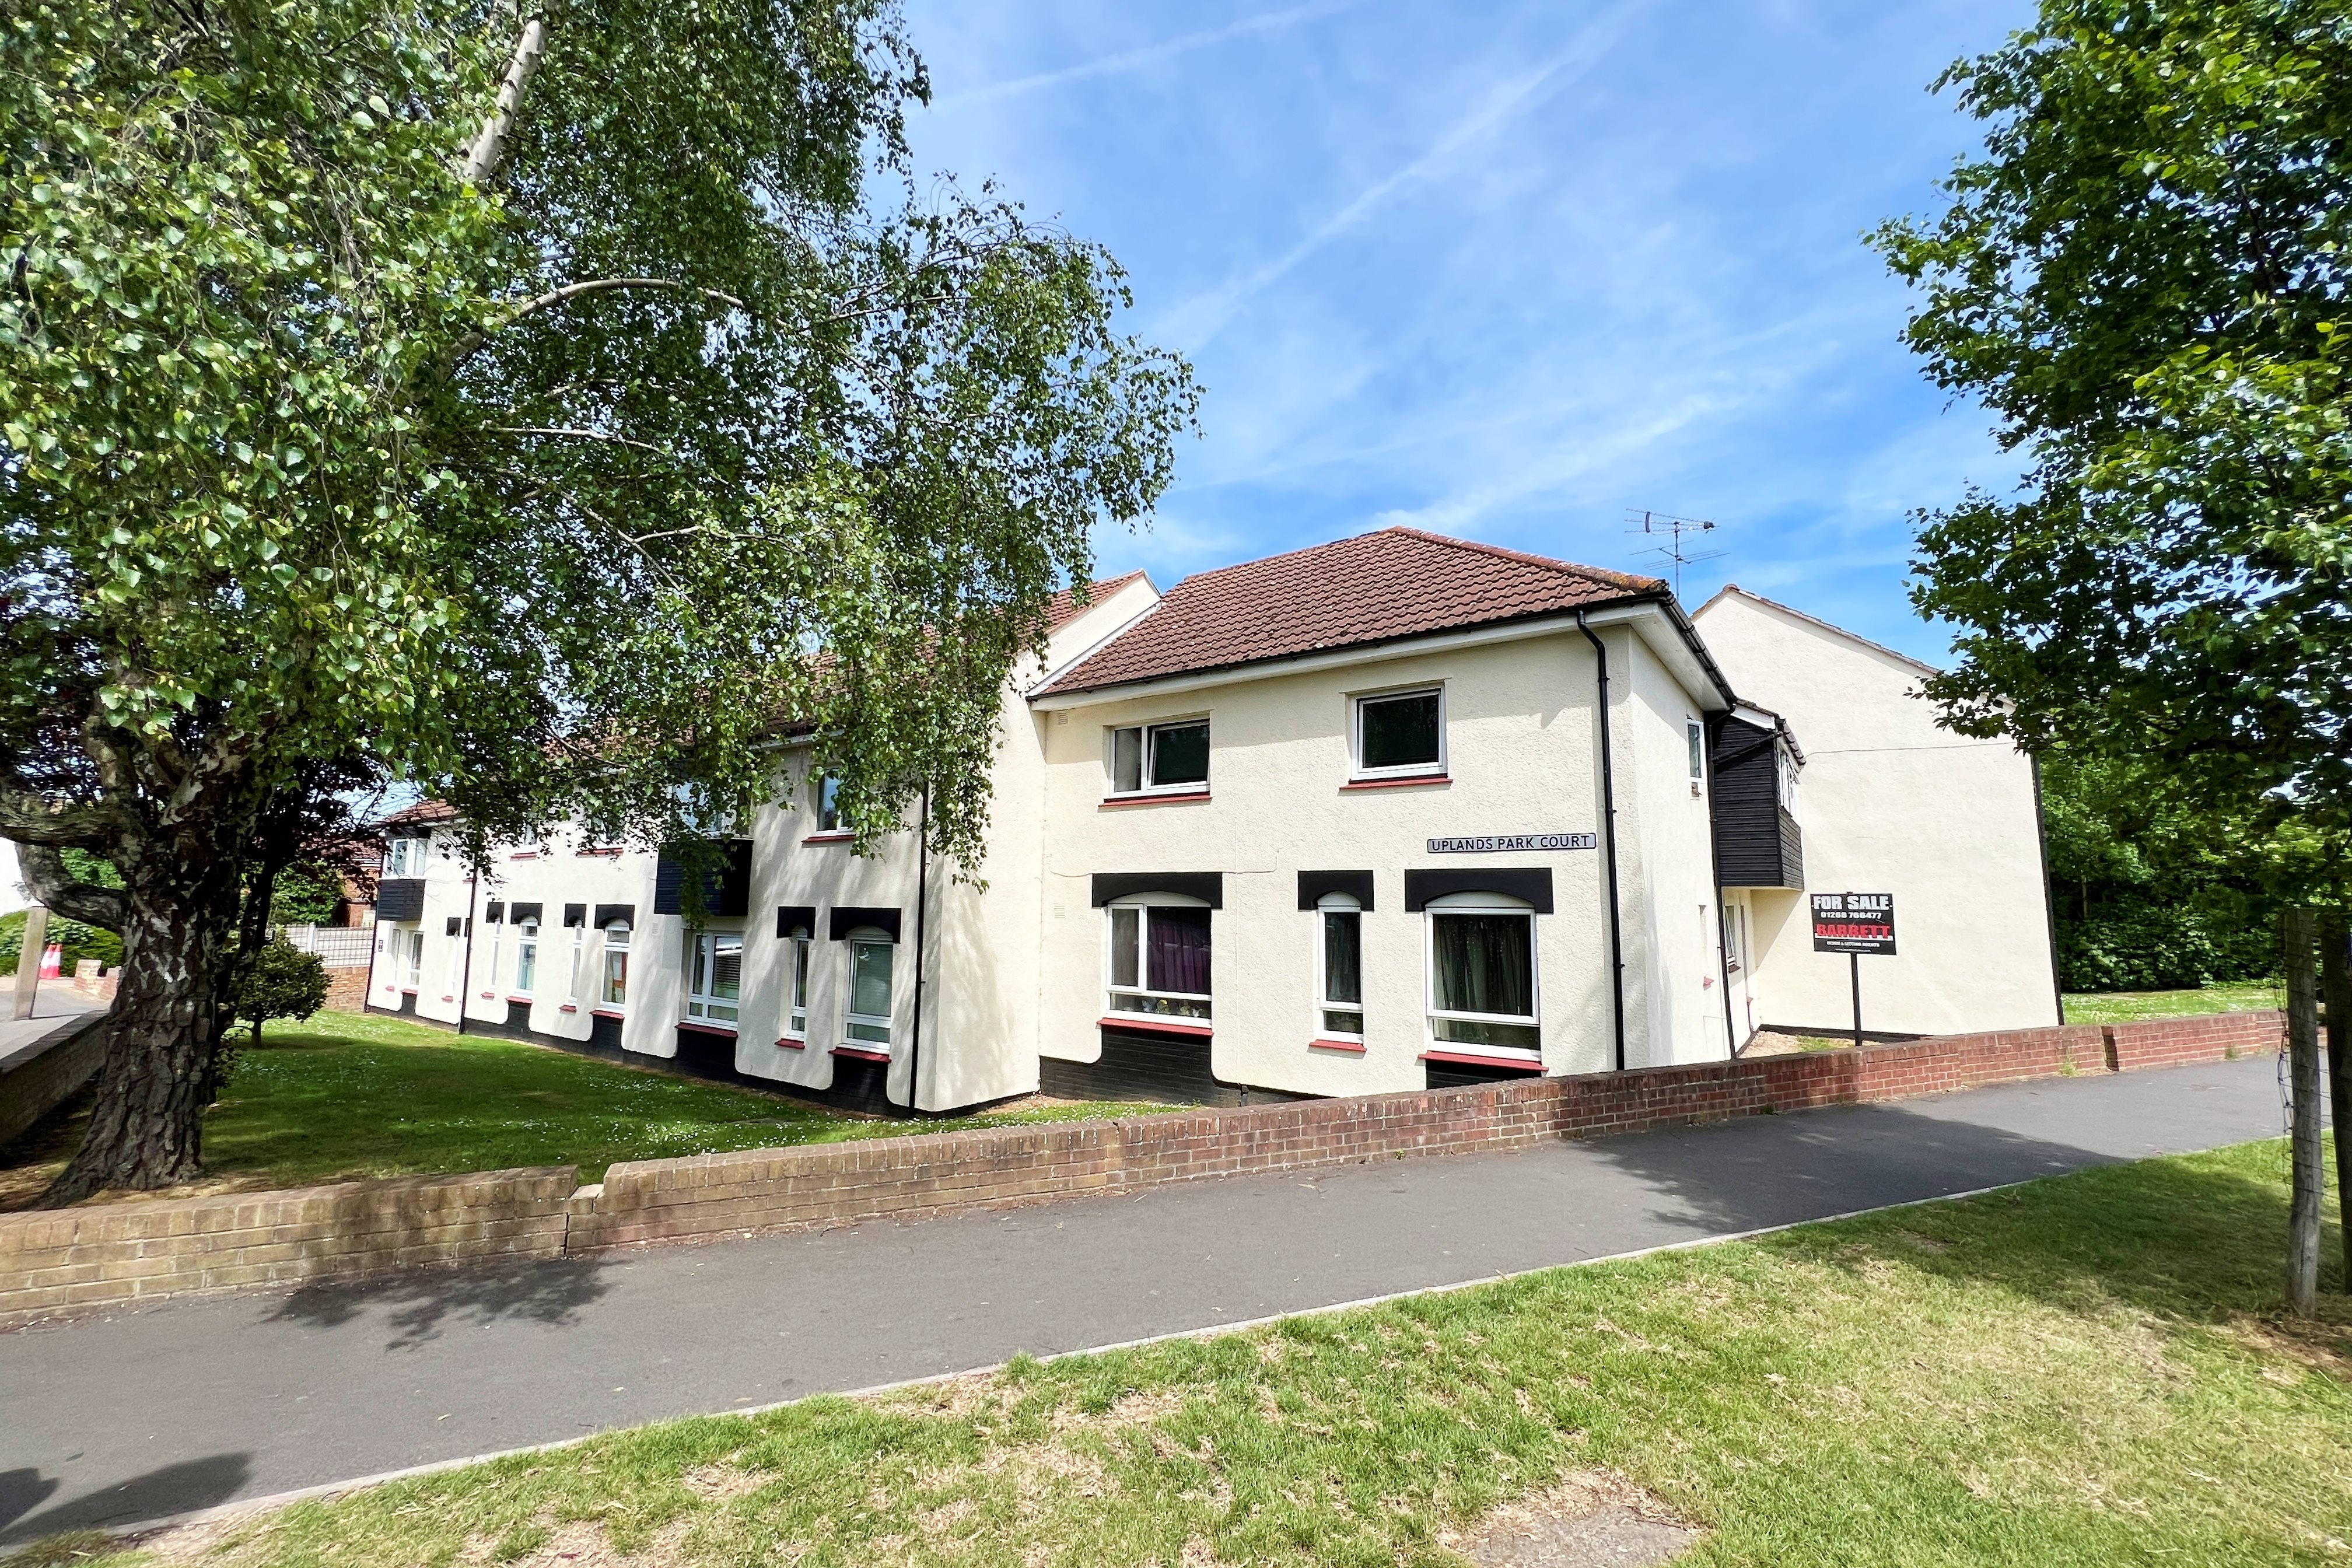 2 bed flat for sale in Uplands Park Court, Rayleigh - Property Image 1